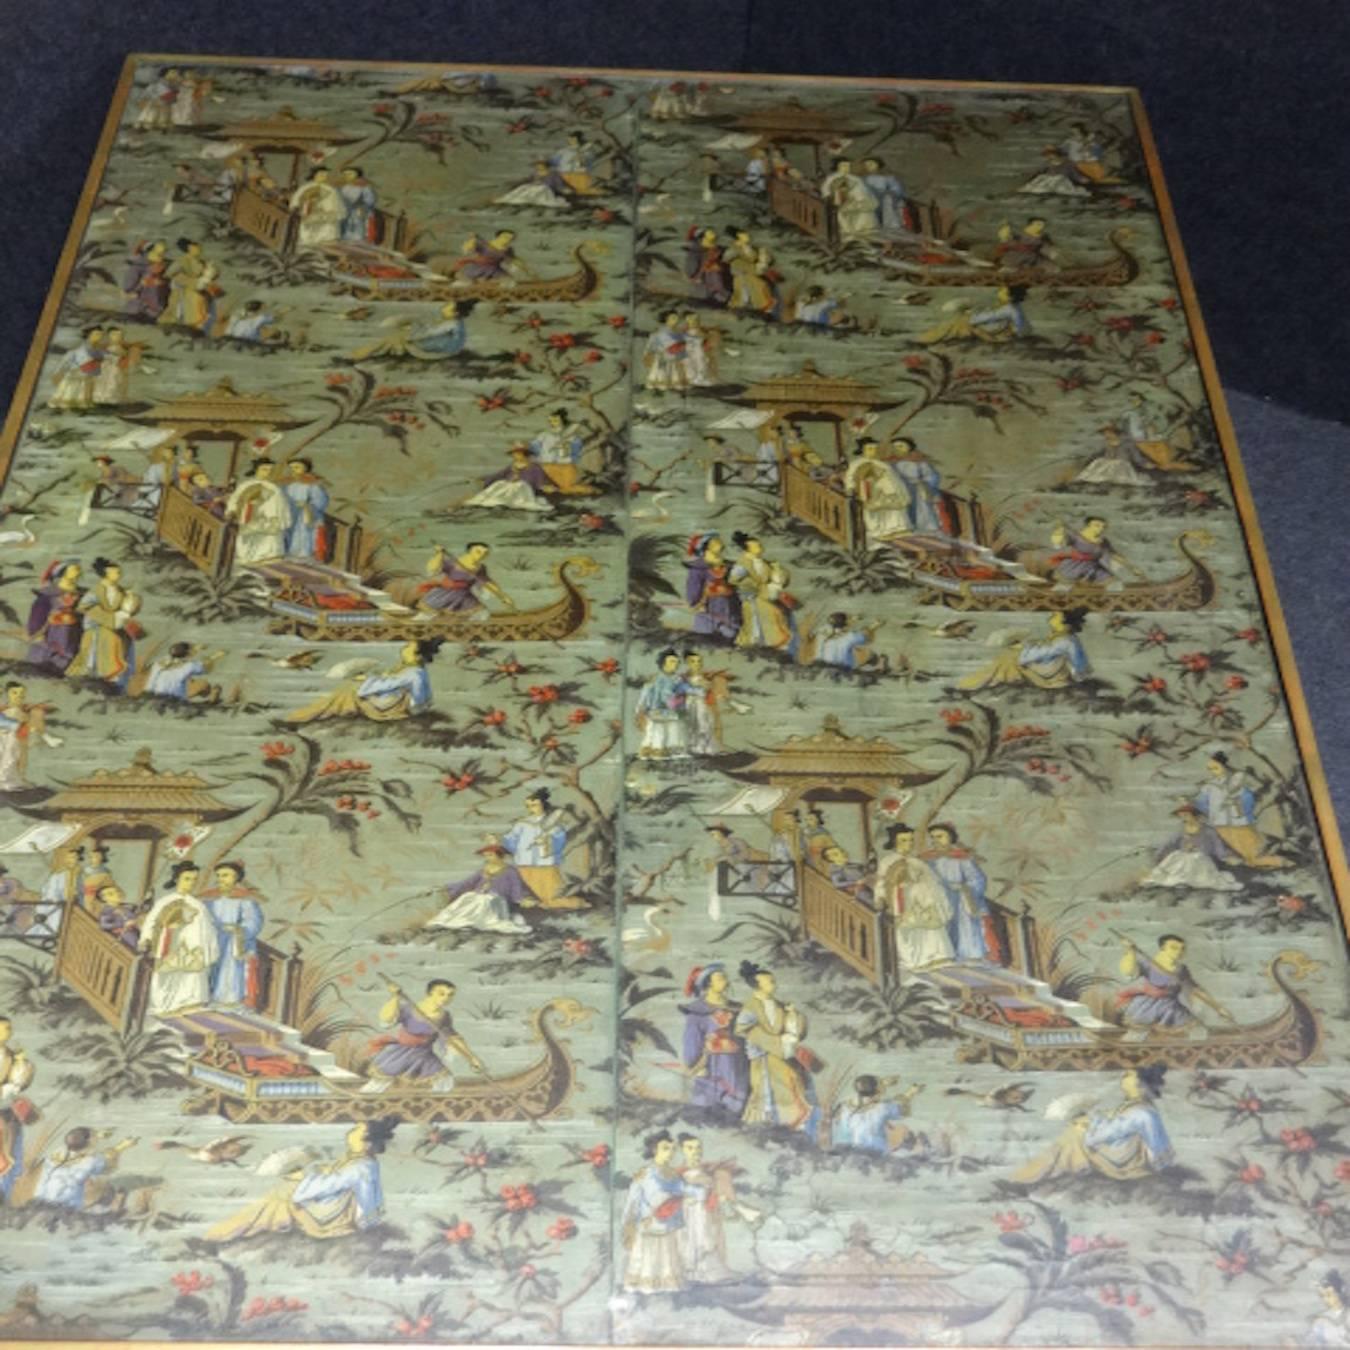 Offered for sale is this very rare and  outstanding hand-painted Chinese screen, which has been mounted onto the top of a bespoke painted coffee table, with a plate glass top, in very good condition.